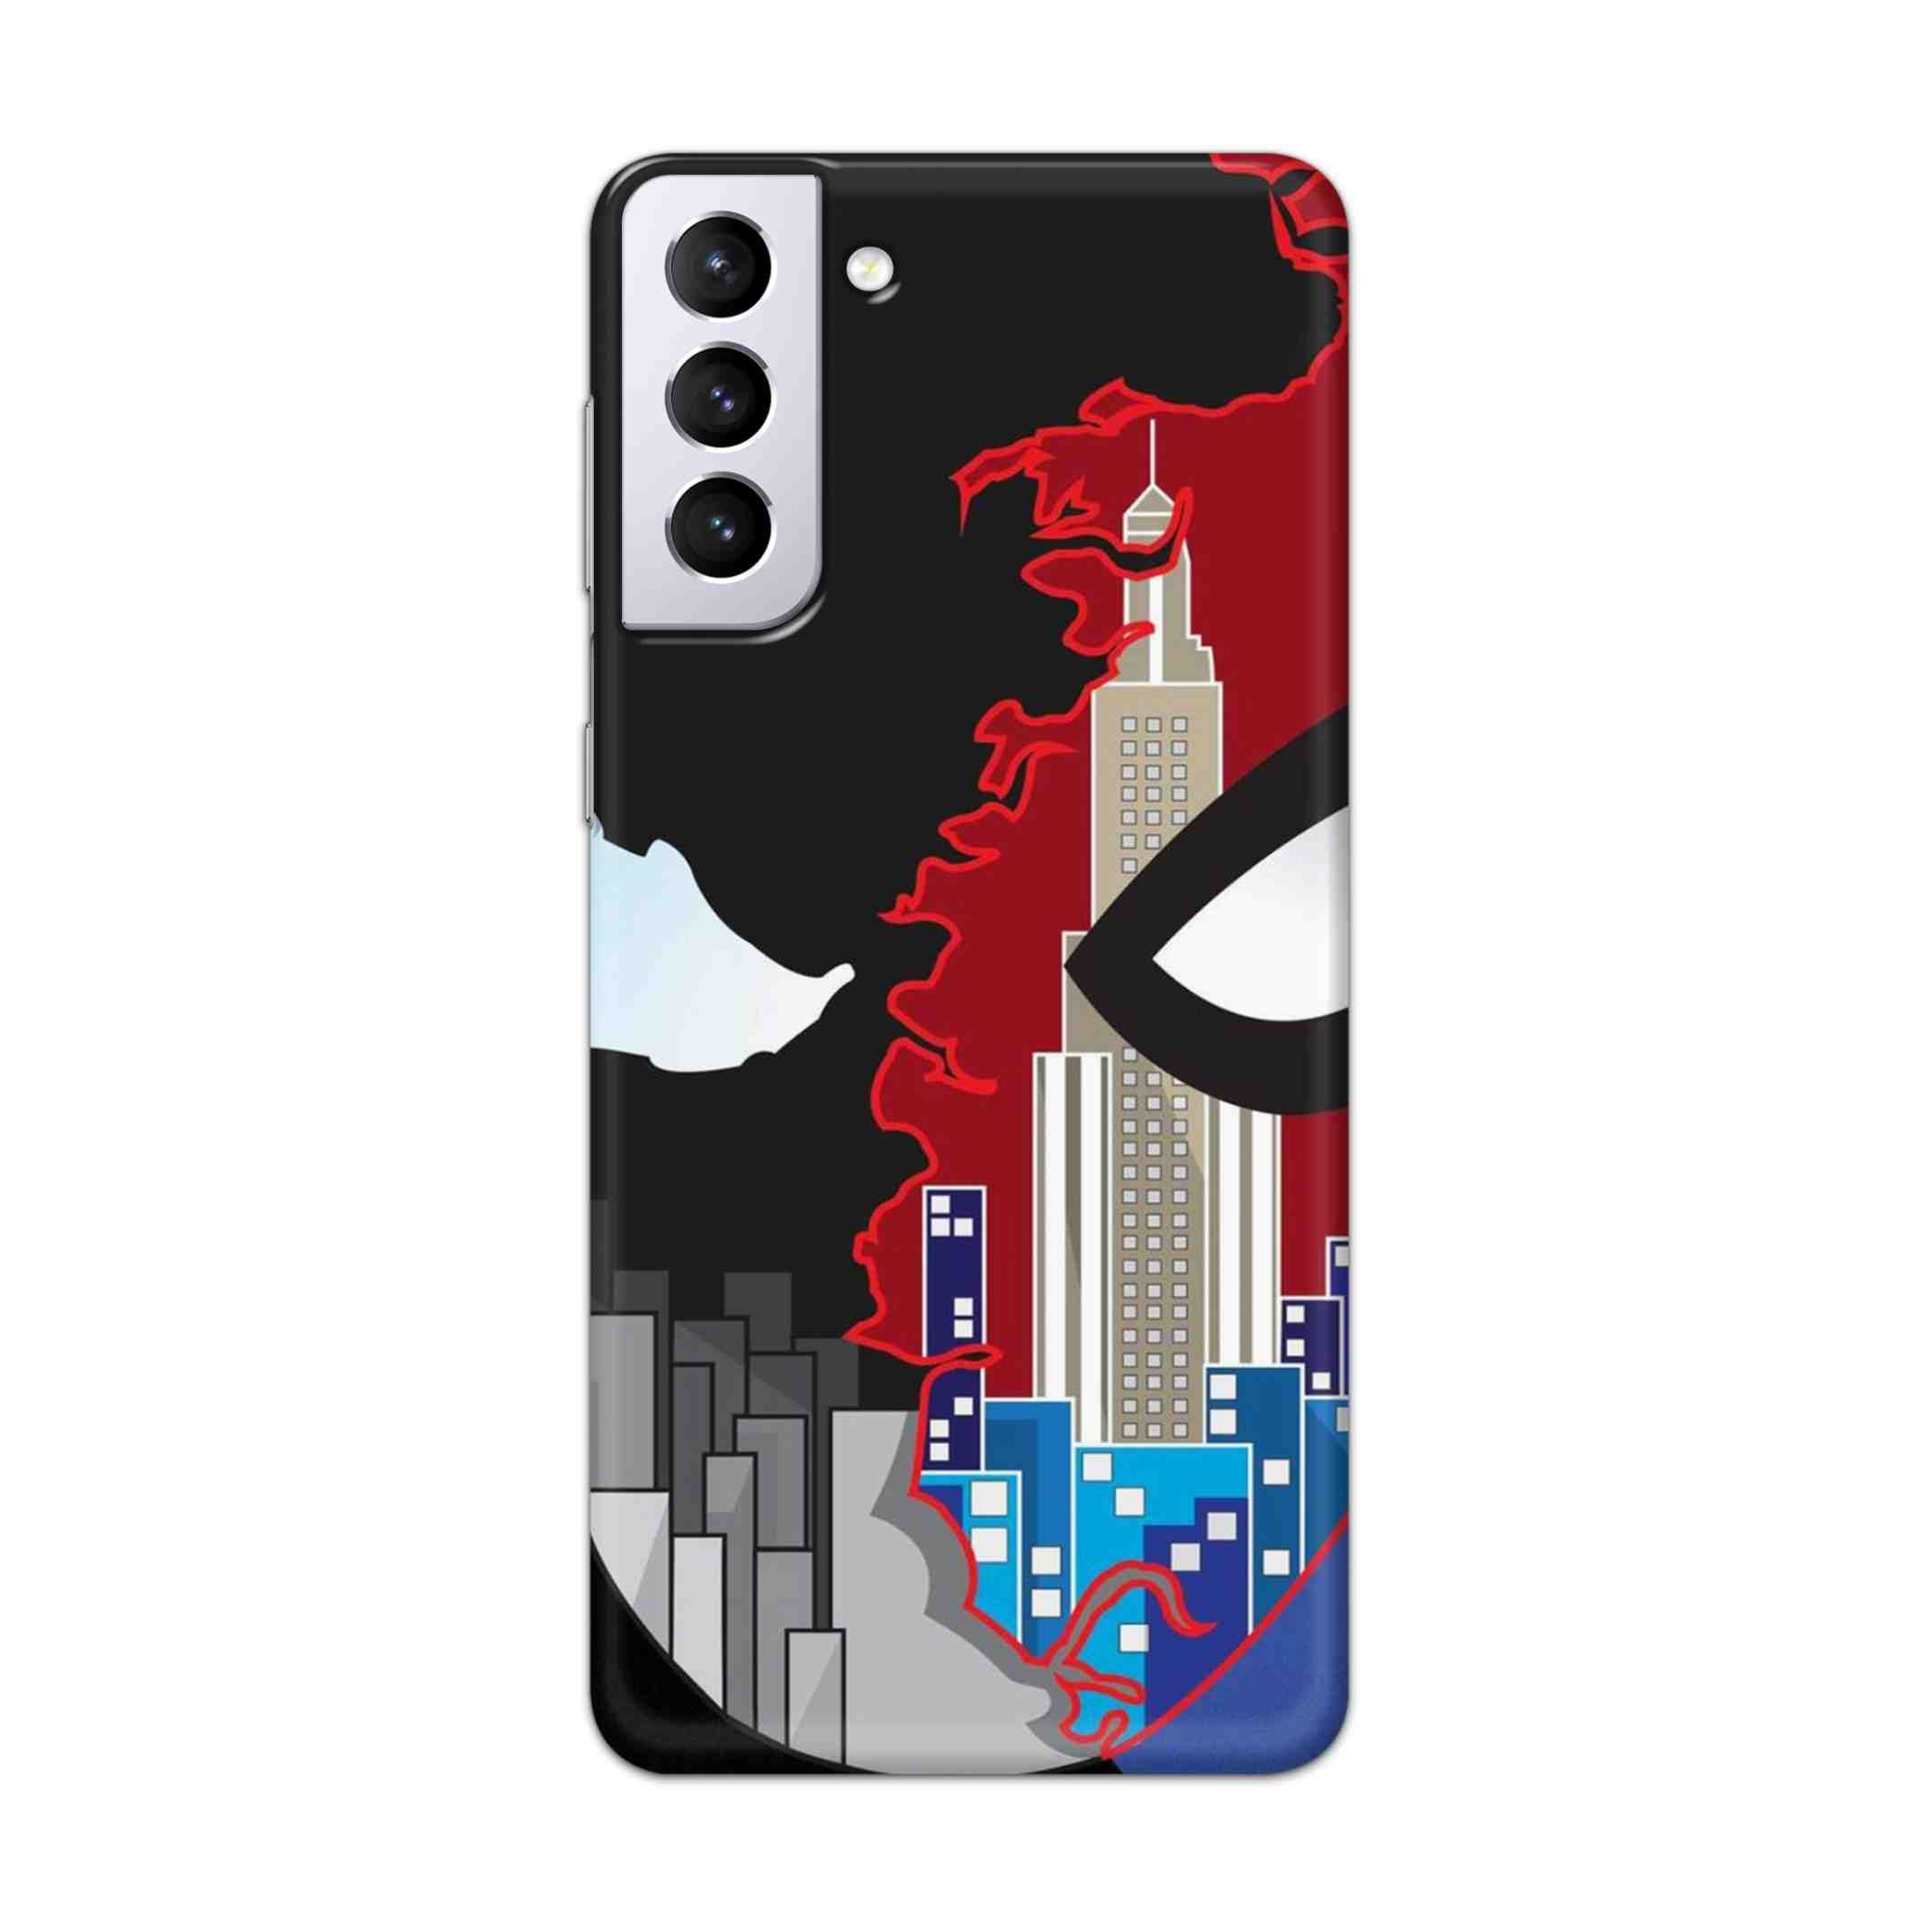 Buy Red And Black Spiderman Hard Back Mobile Phone Case Cover For Samsung Galaxy S21 Online